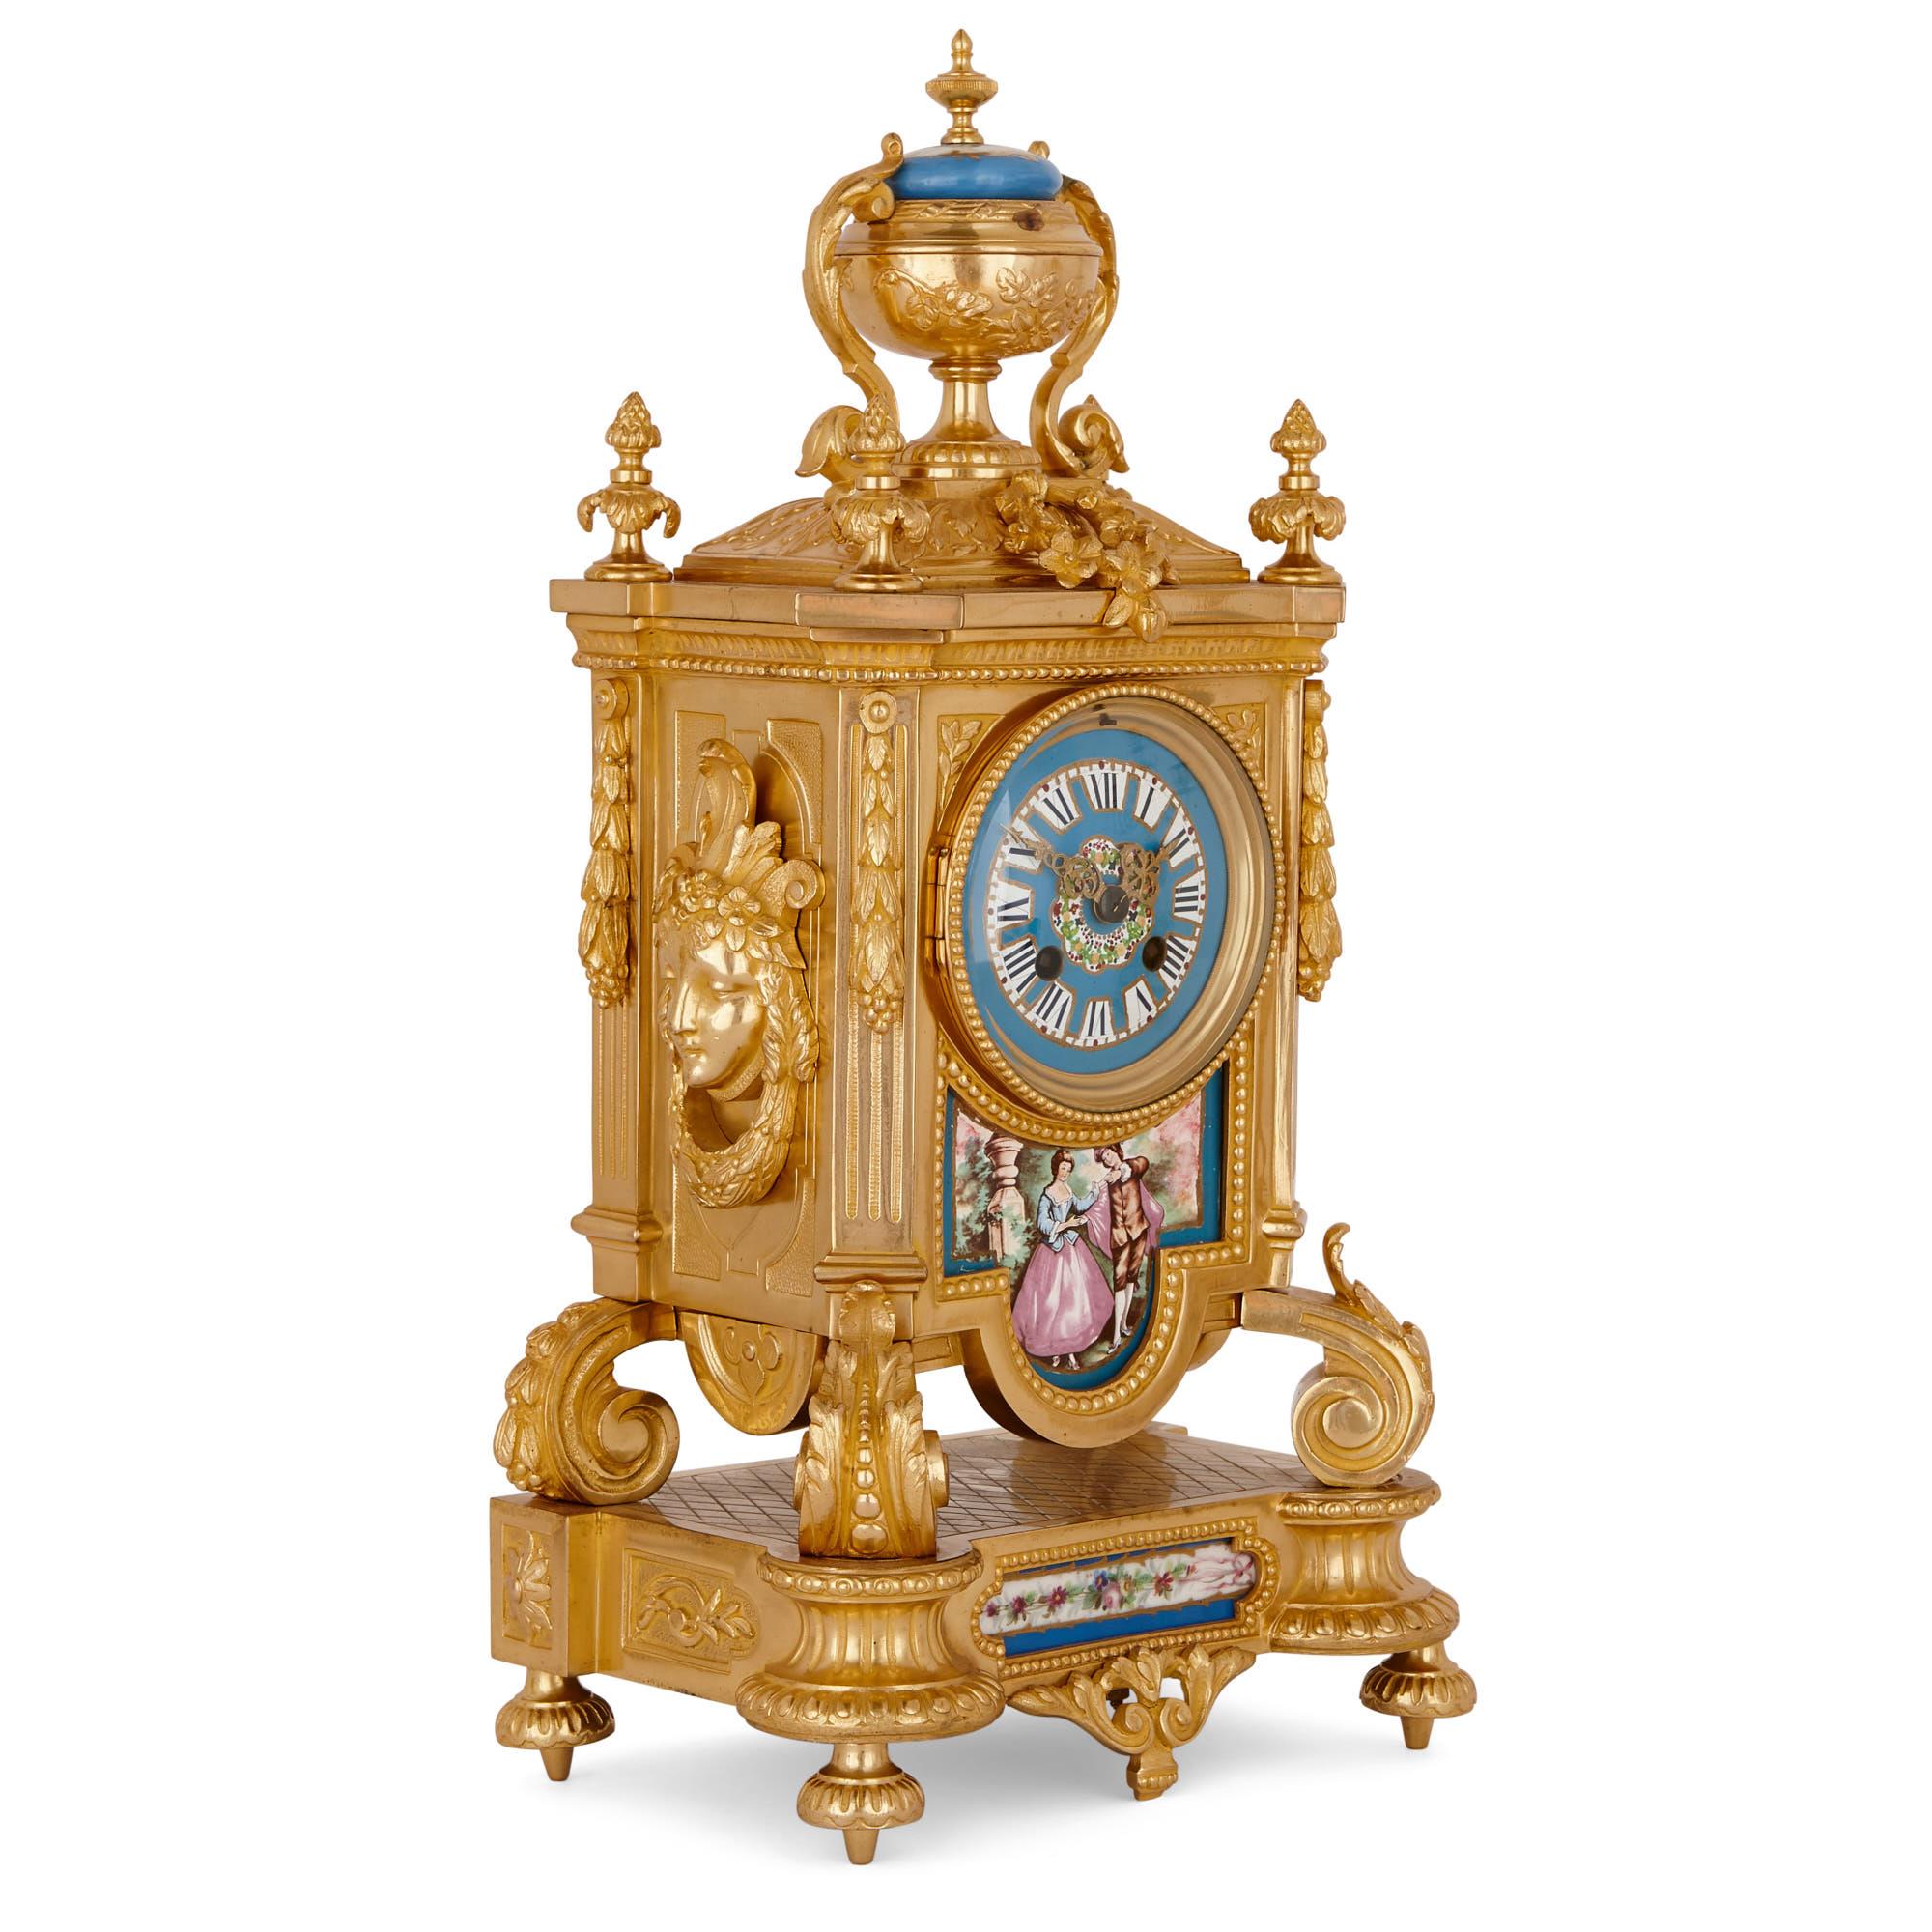 This exquisite clock set is designed in an elegant 18th-Century Rococo manner, in the style of Sèvres porcelain wares. Rococo is characterised by its use of pastel colours, graceful natural forms and courtly elegance. 

The mantel clock case is